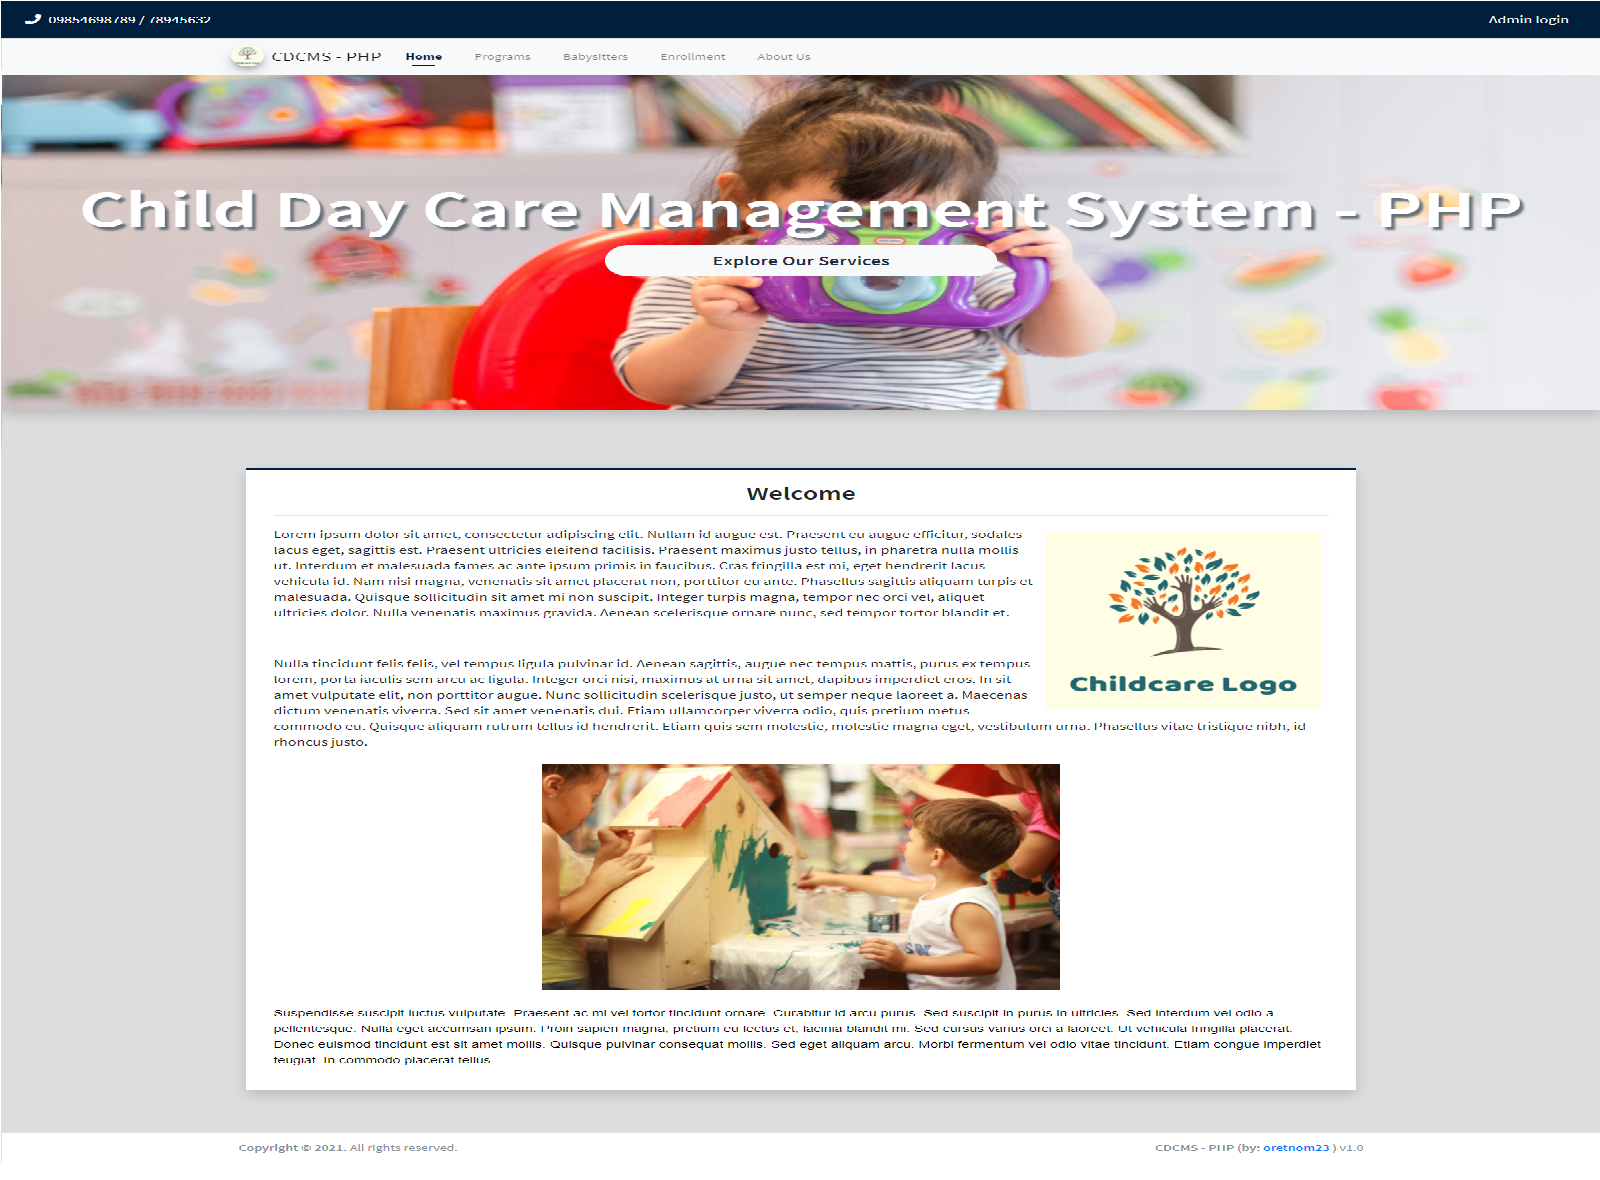 Child's Day Care Management System